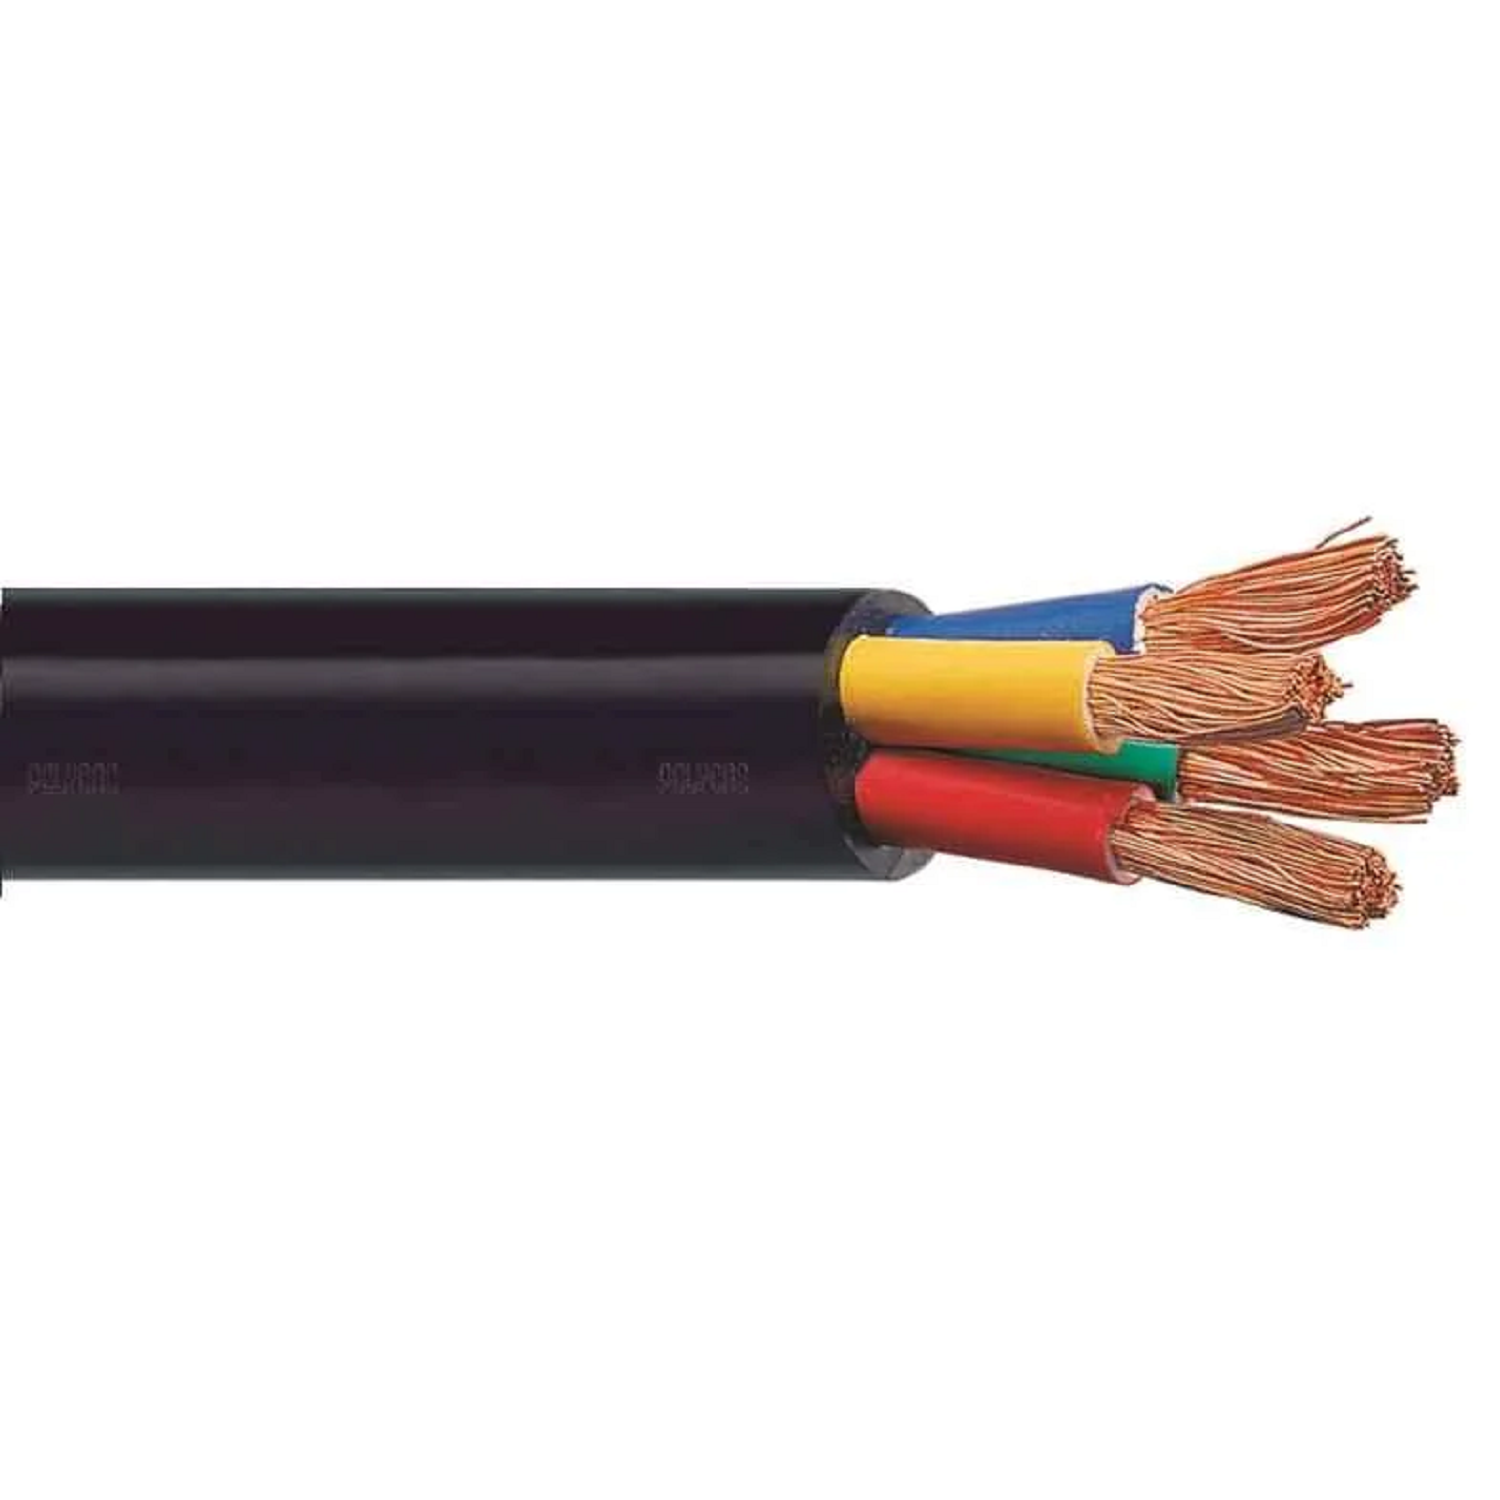 400 Sqmm Polycab Copper Flexible Cable (11 KV) With PVC Insulated Sheathed - Black